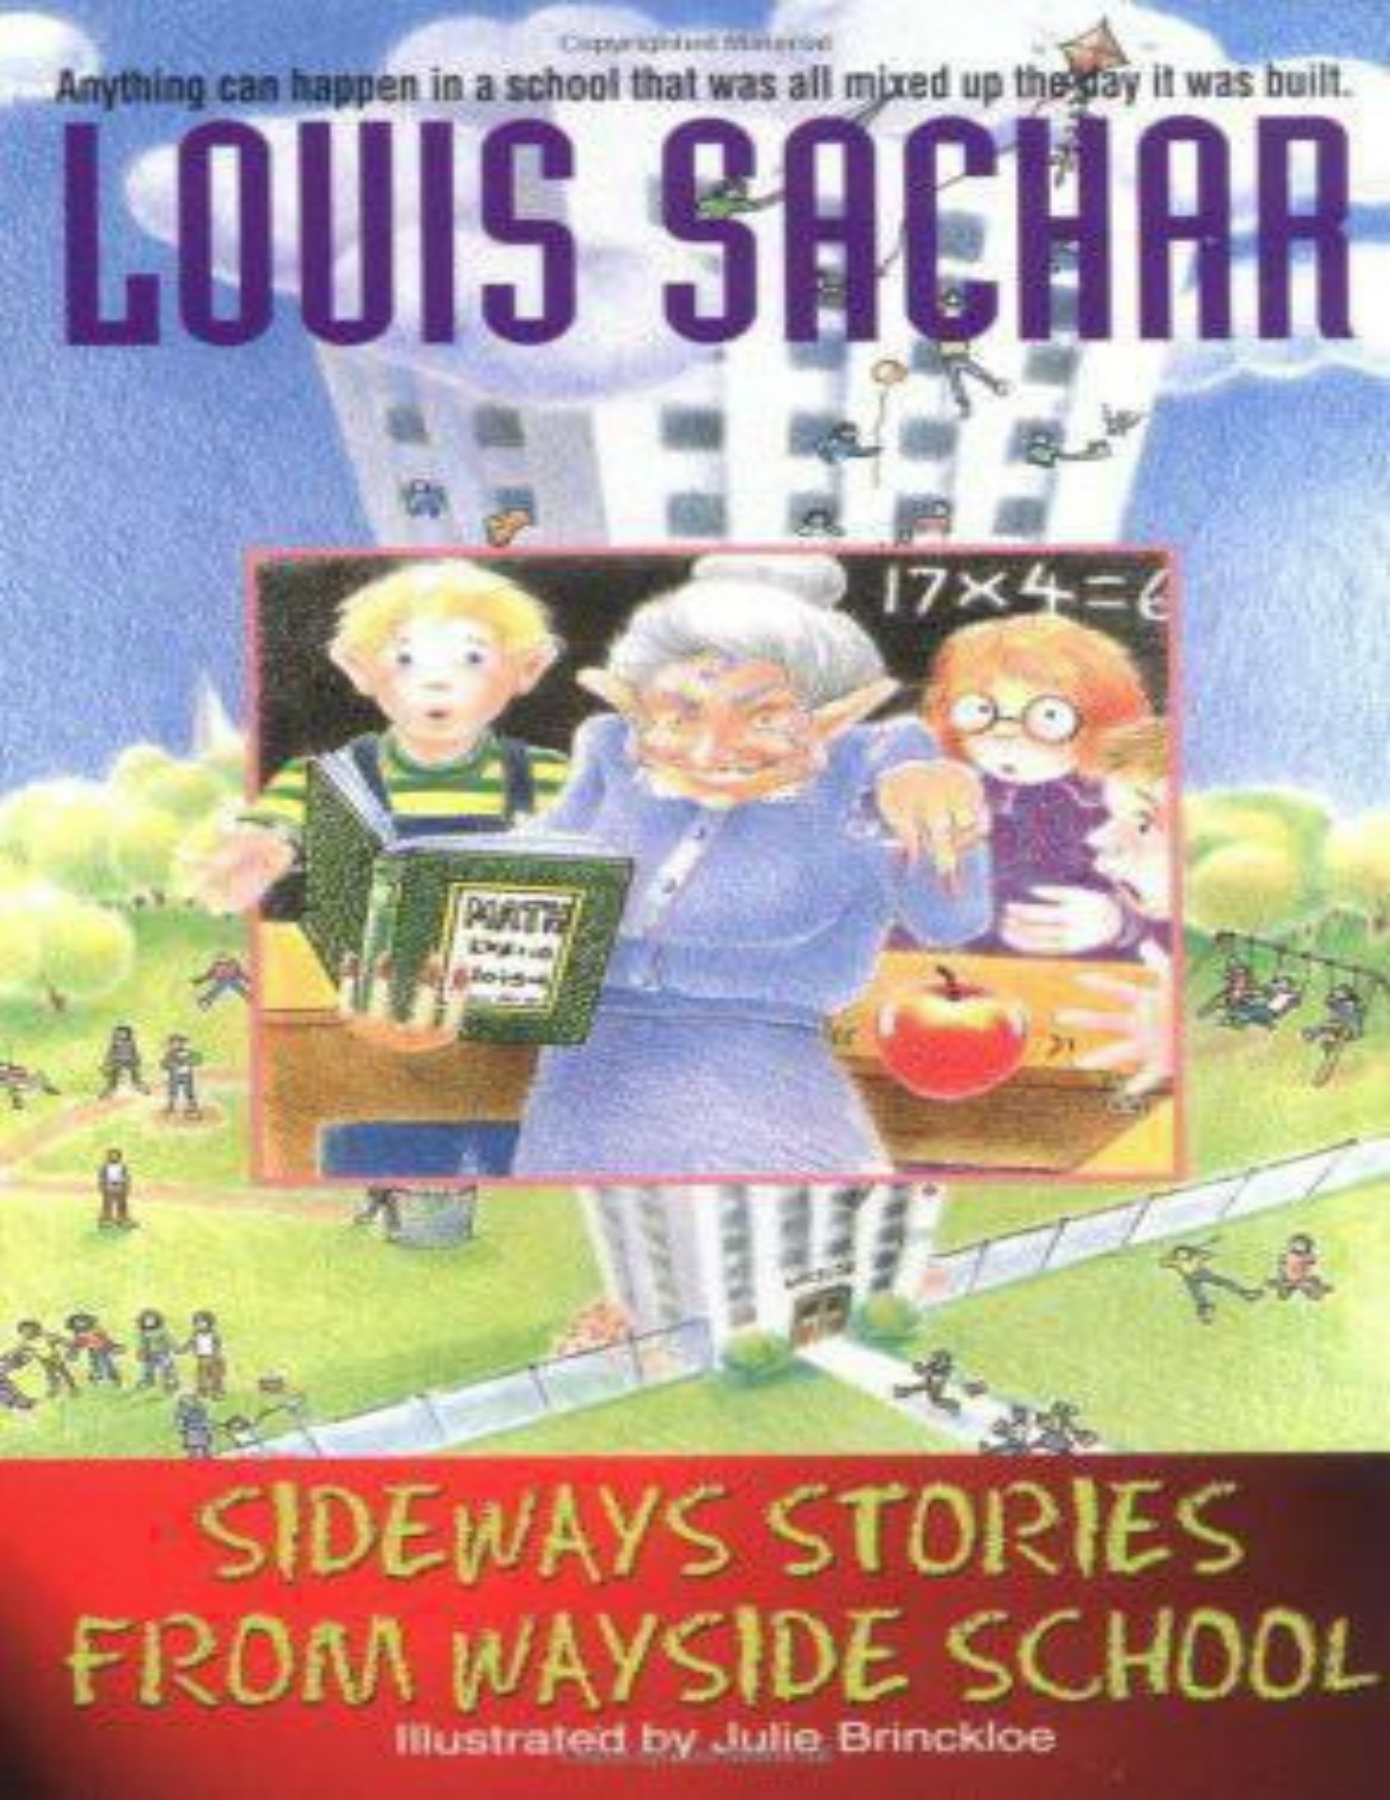 The Wayside School Complete Collection: Sideways Stories from